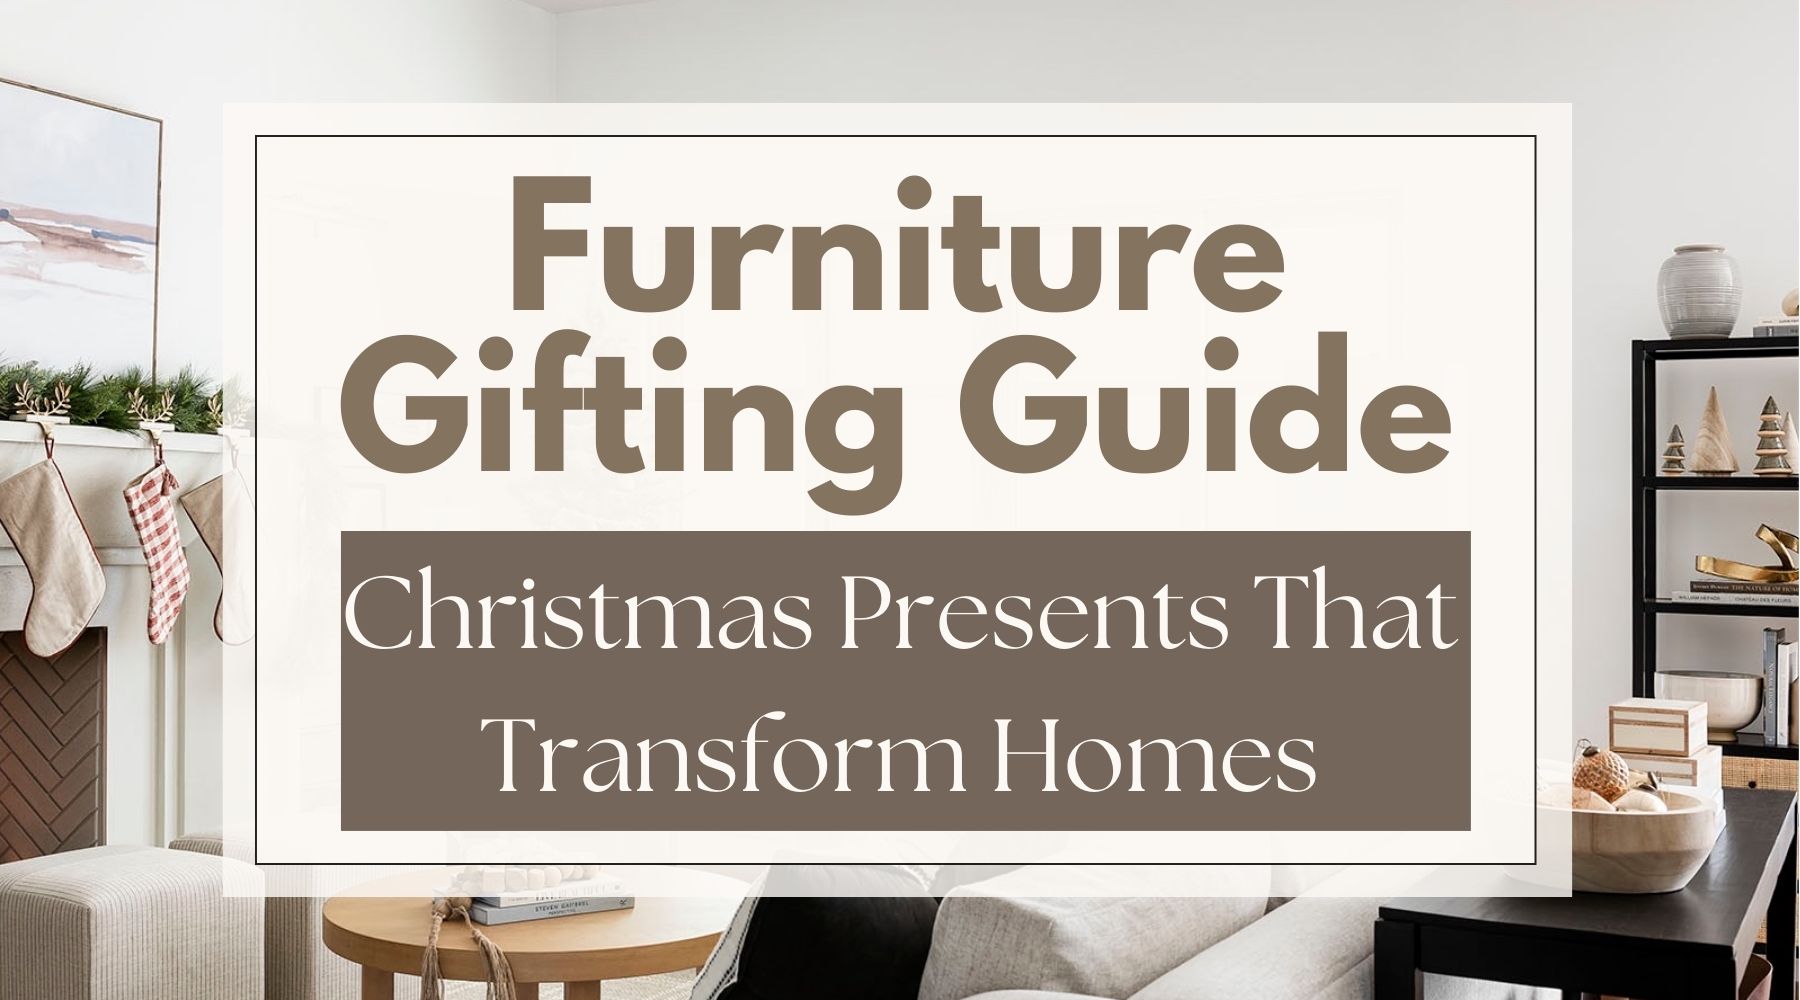 furniture gifting guide christmas presents that transform homes